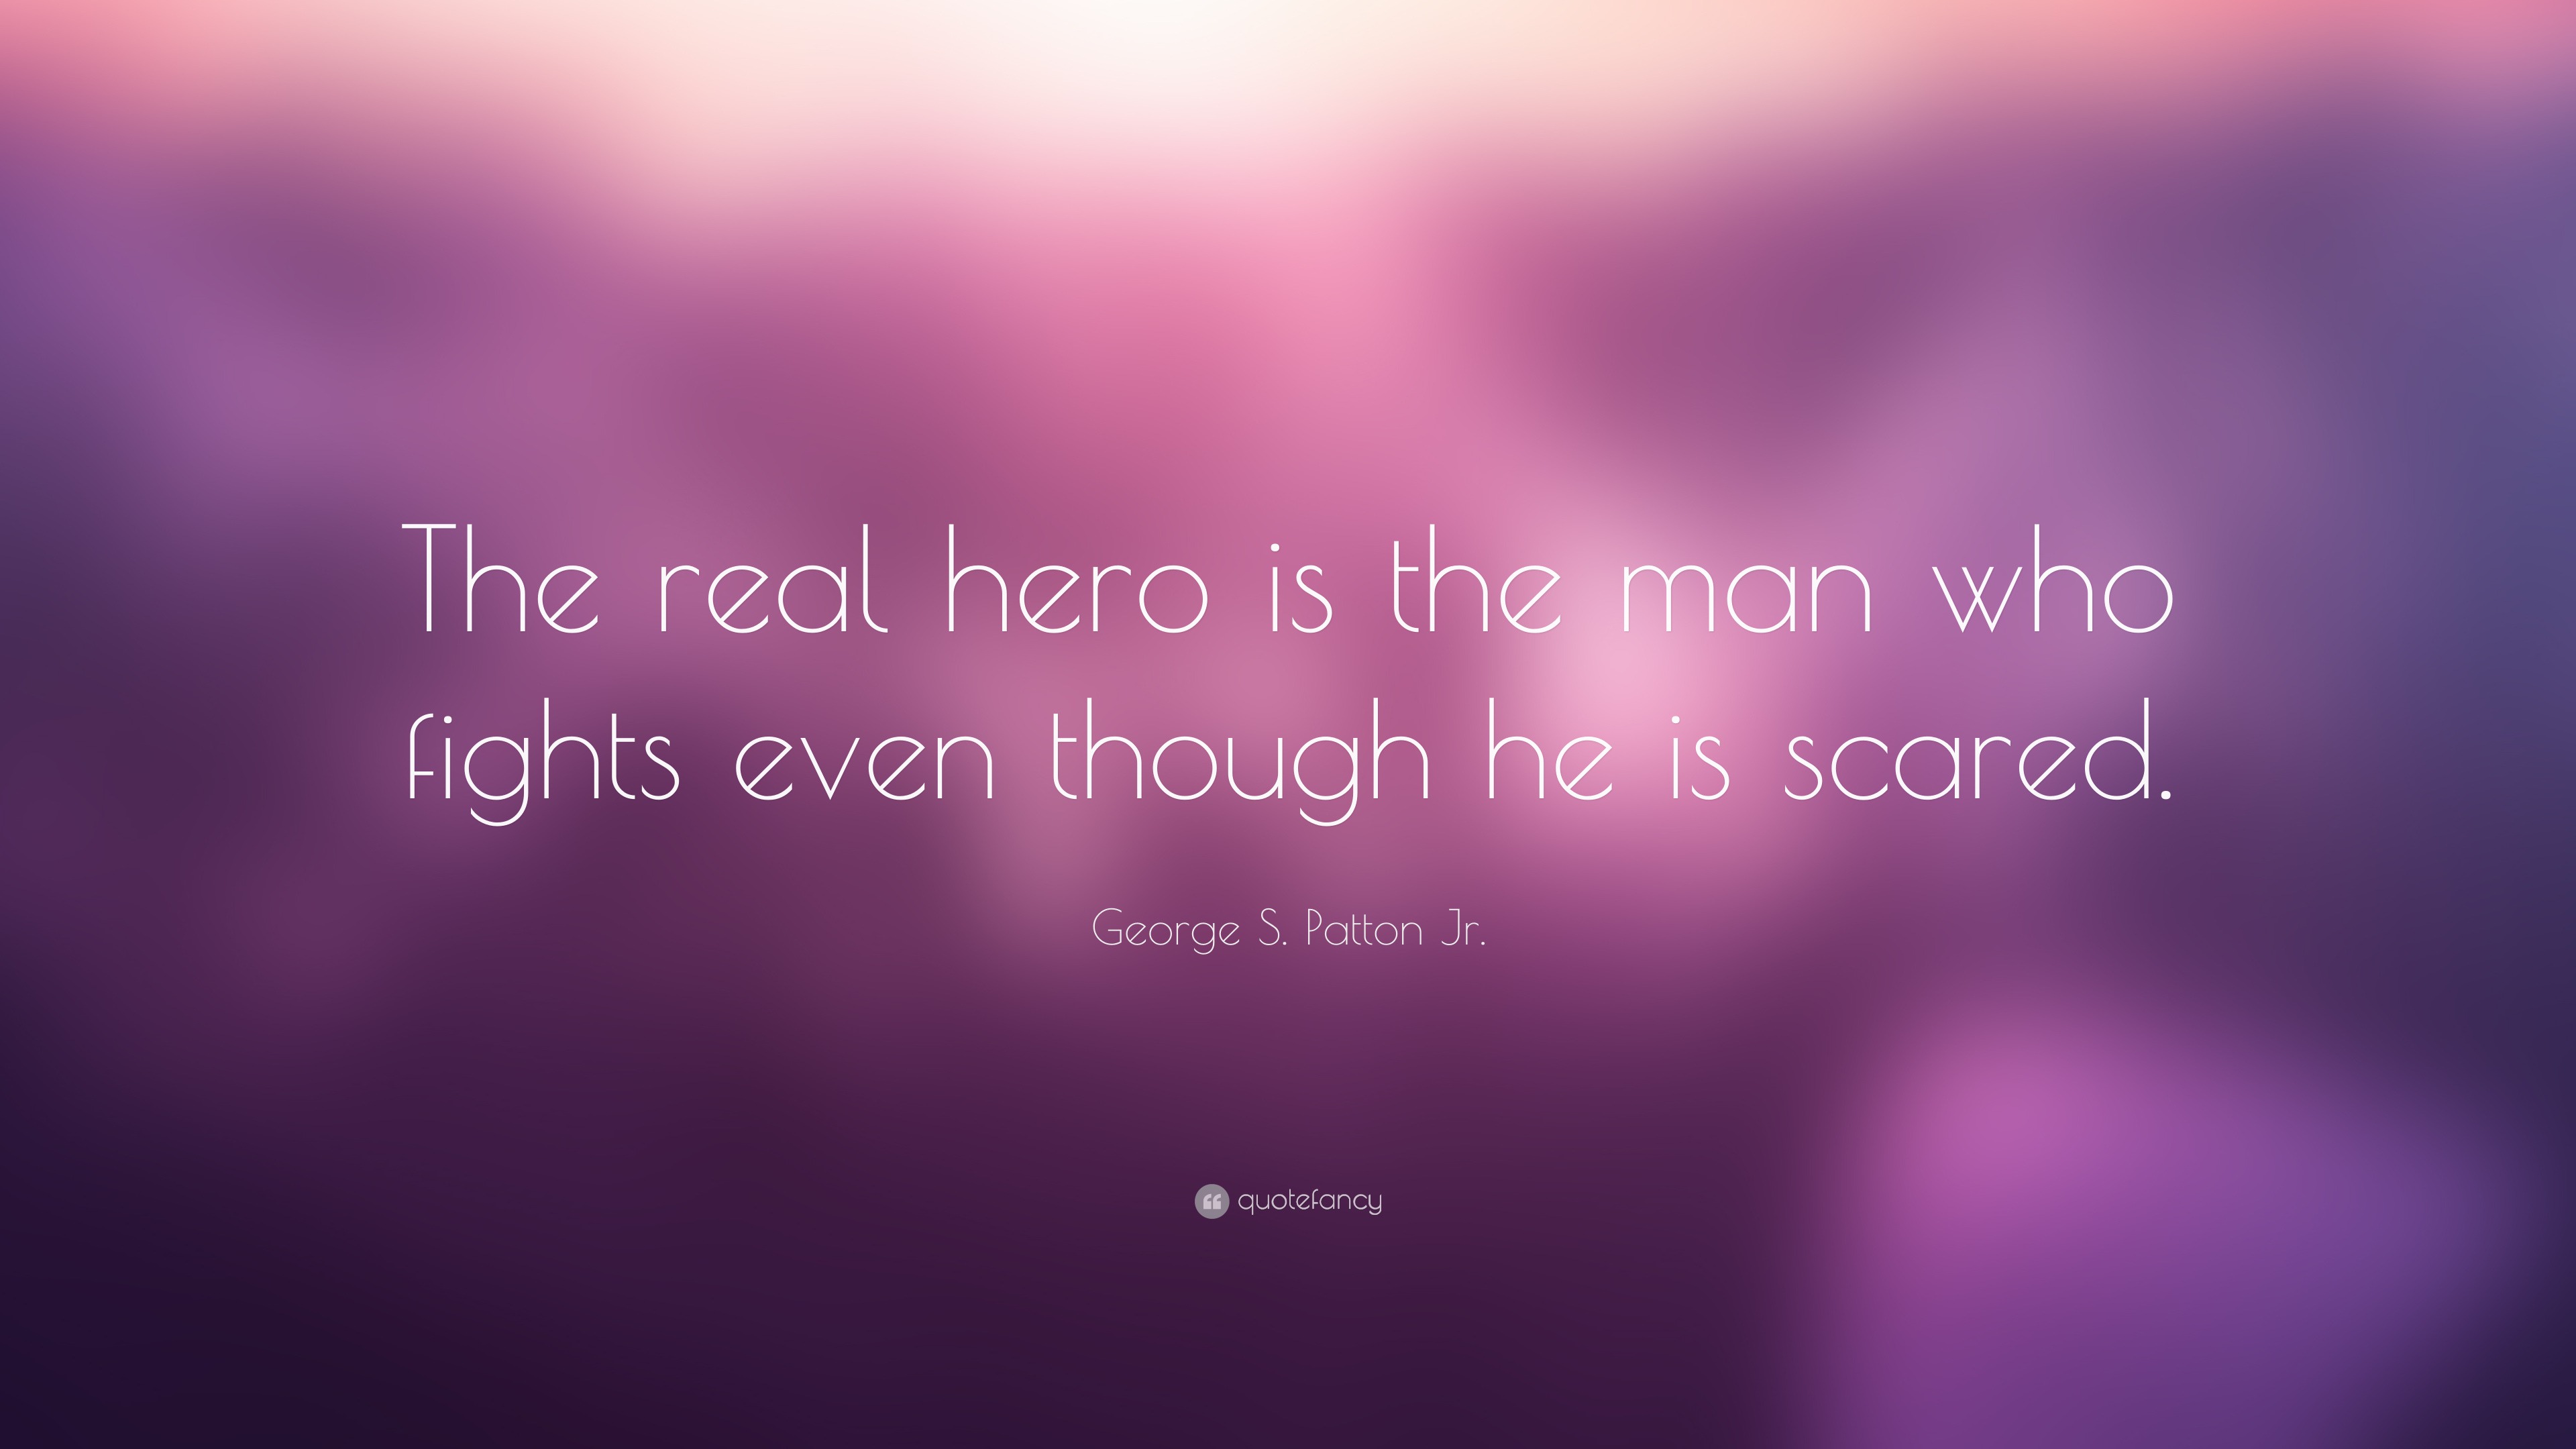 George S. Patton Jr. Quote: “The real hero is the man who fights even ...